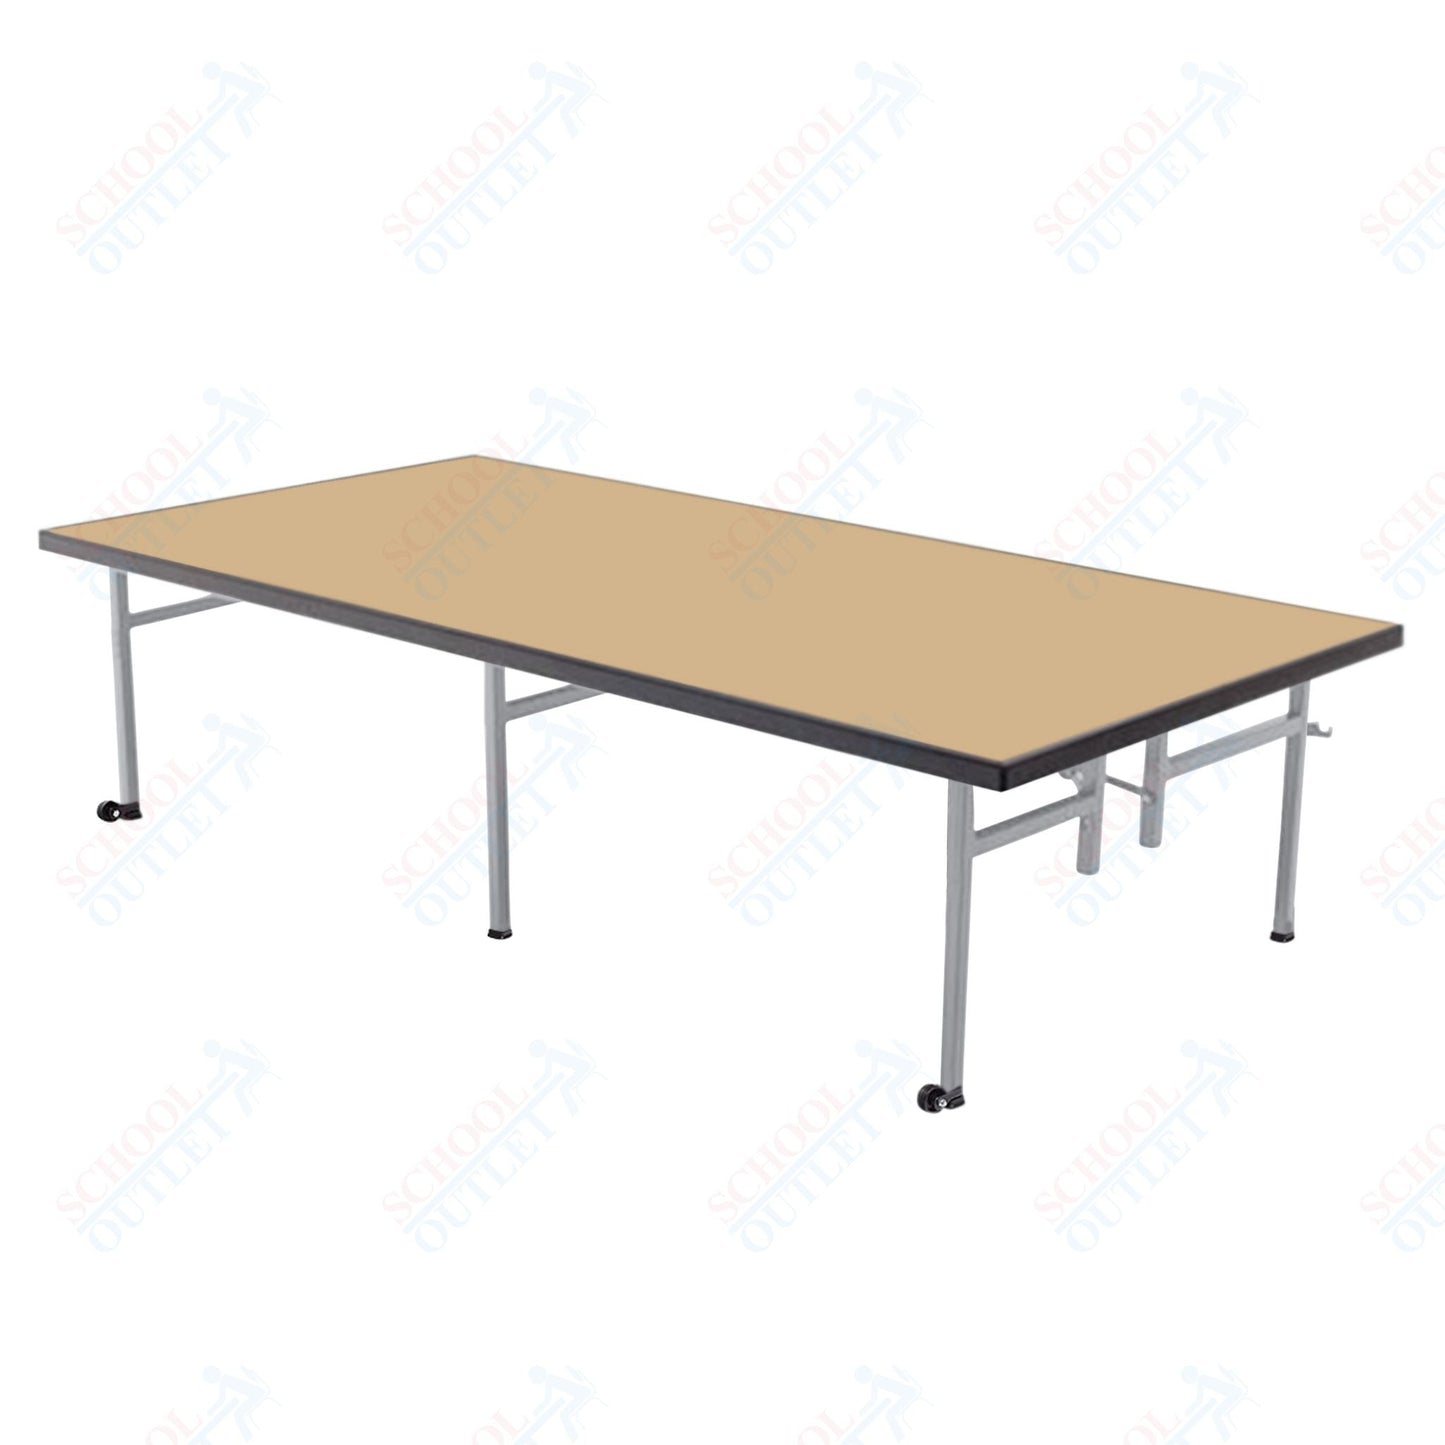 AmTab Fixed Height Stage - Carpet Top - 36"W x 48"L x 8"H (AmTab AMT - ST3408C) - SchoolOutlet